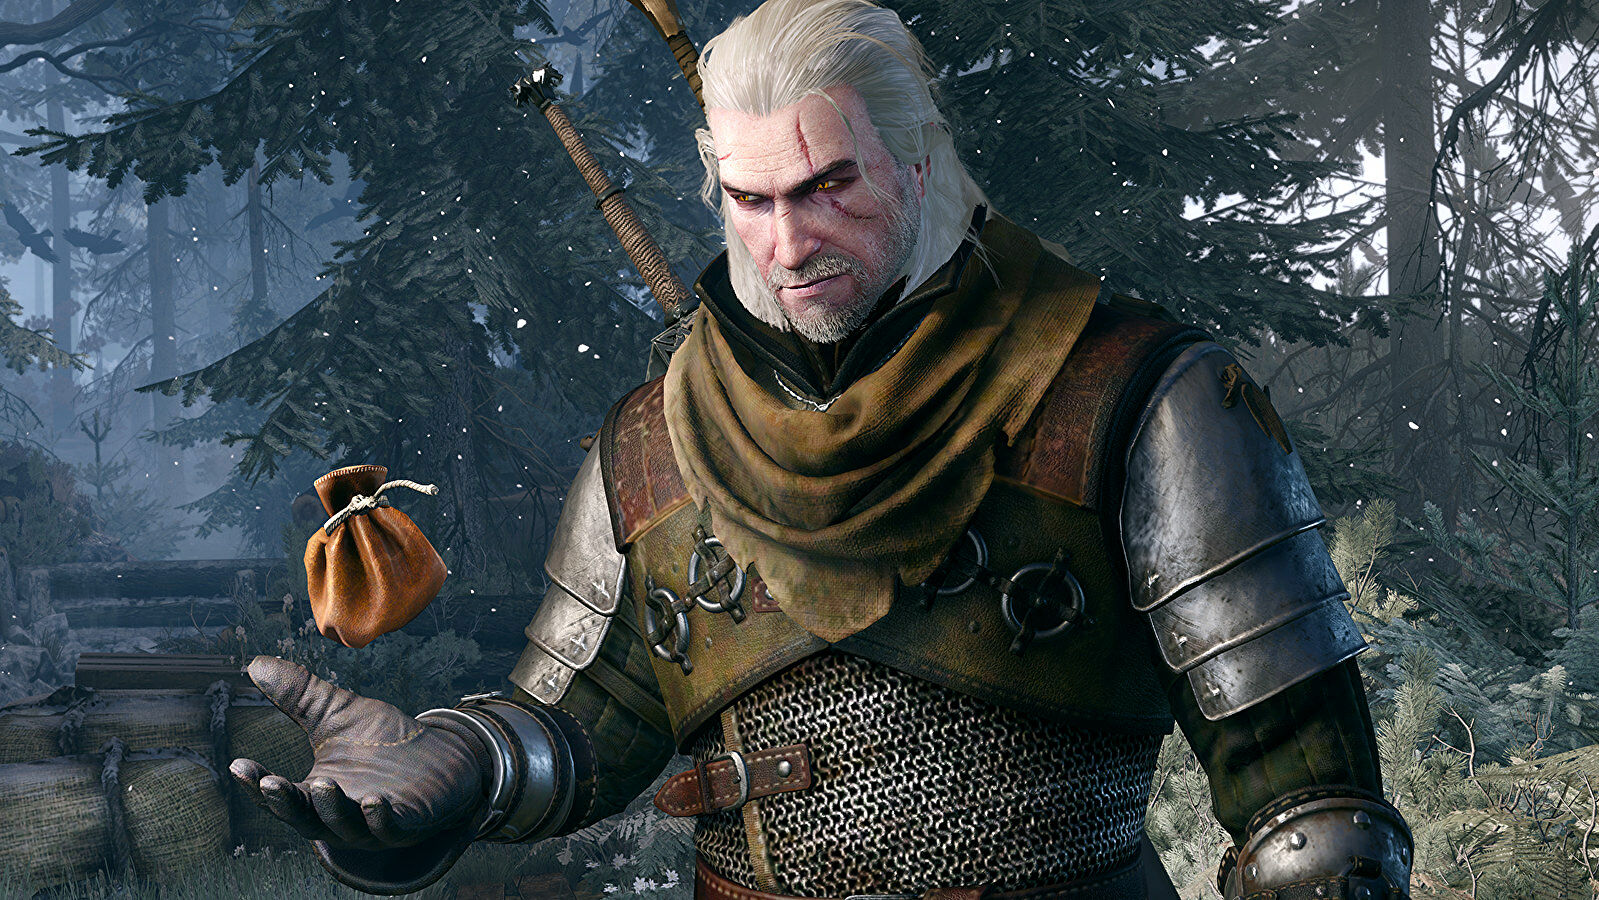 The Witcher 3’s ray tracing update finally arrives in December